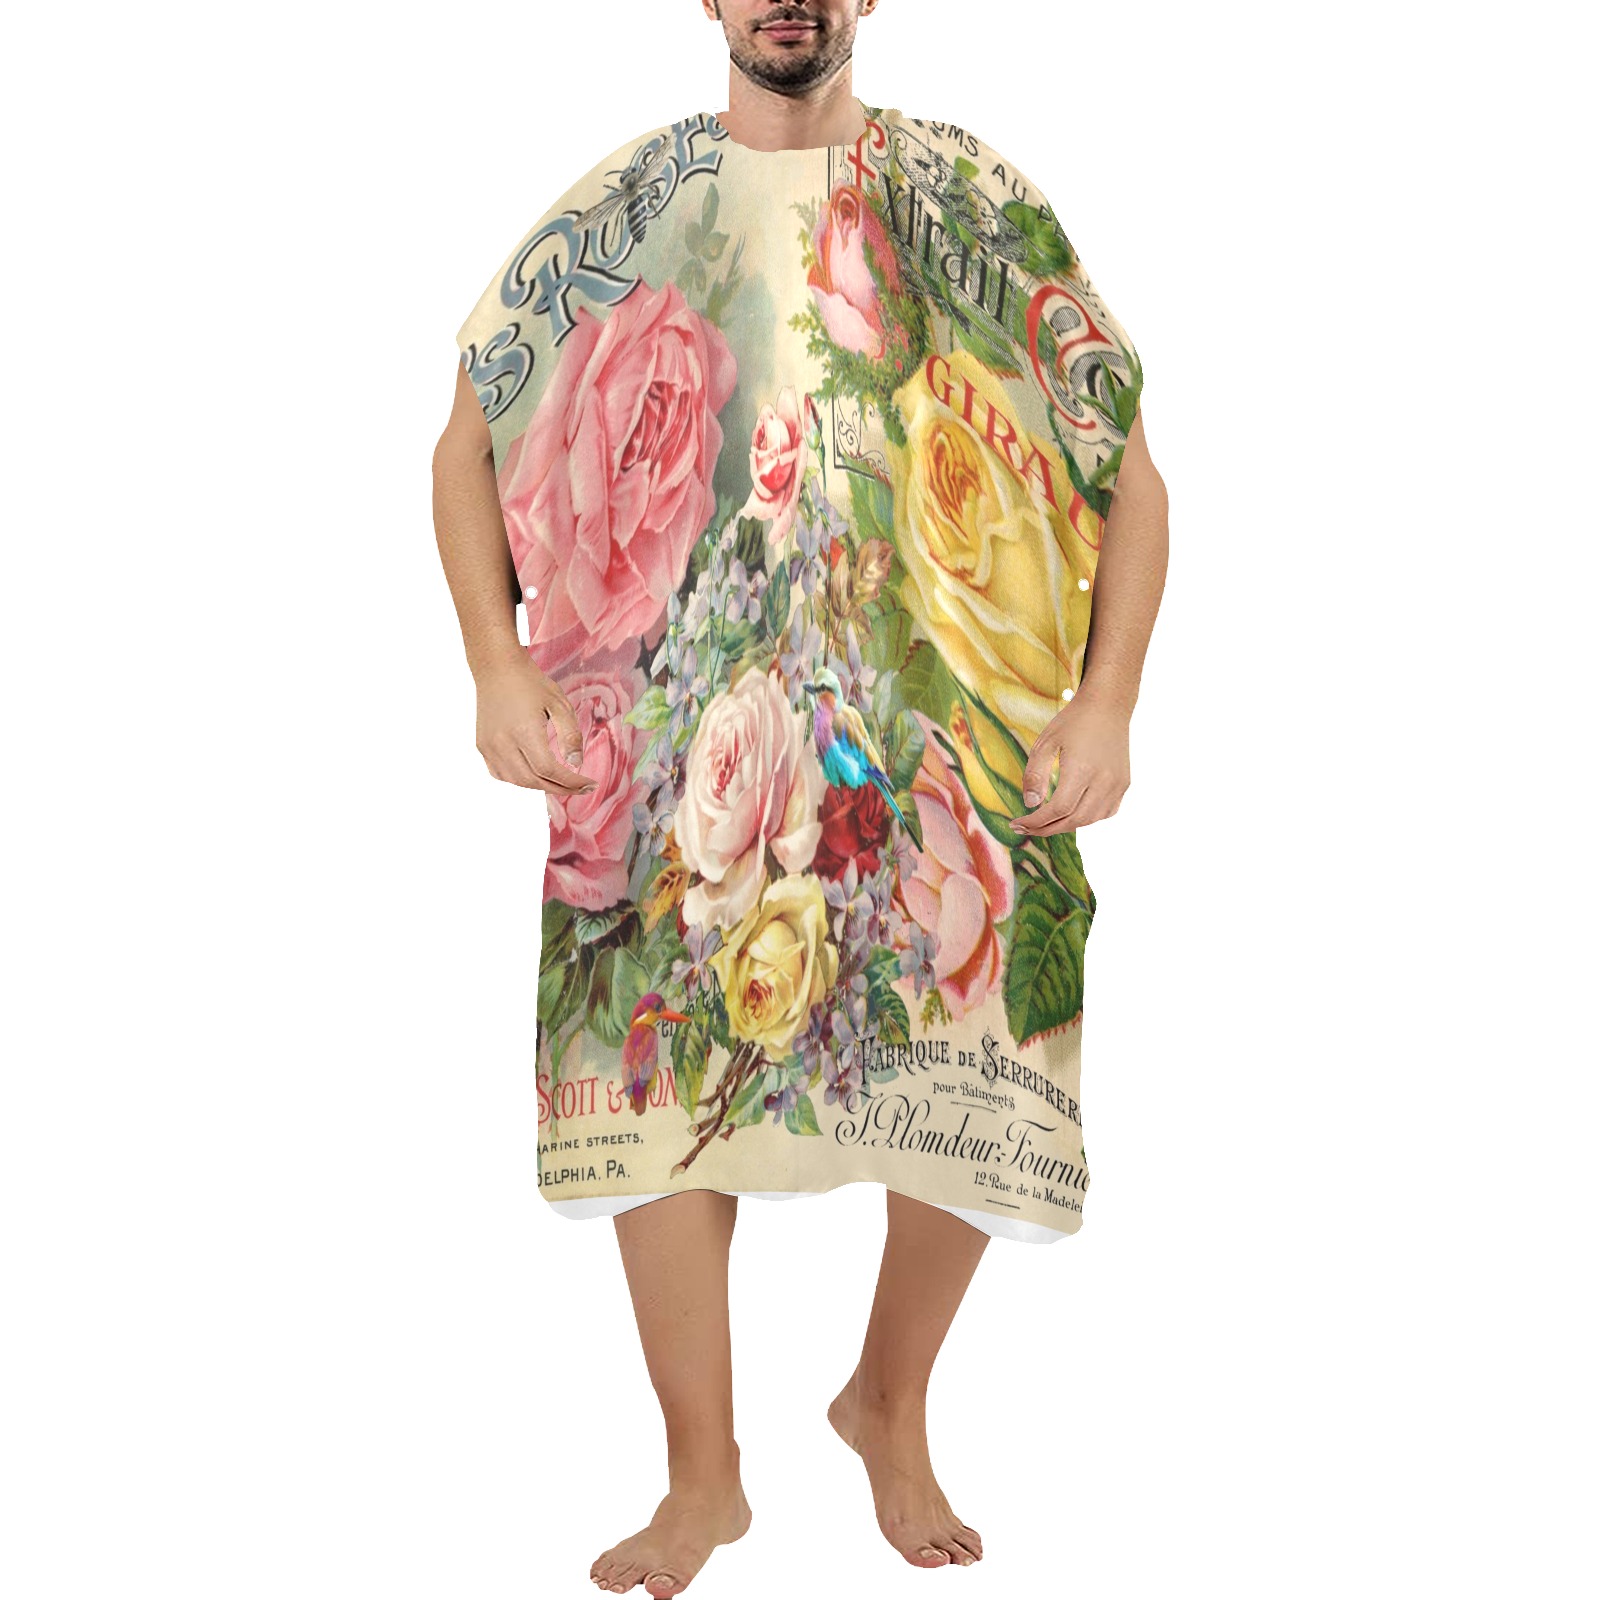 Scott's Roses Beach Changing Robe (Large Size)